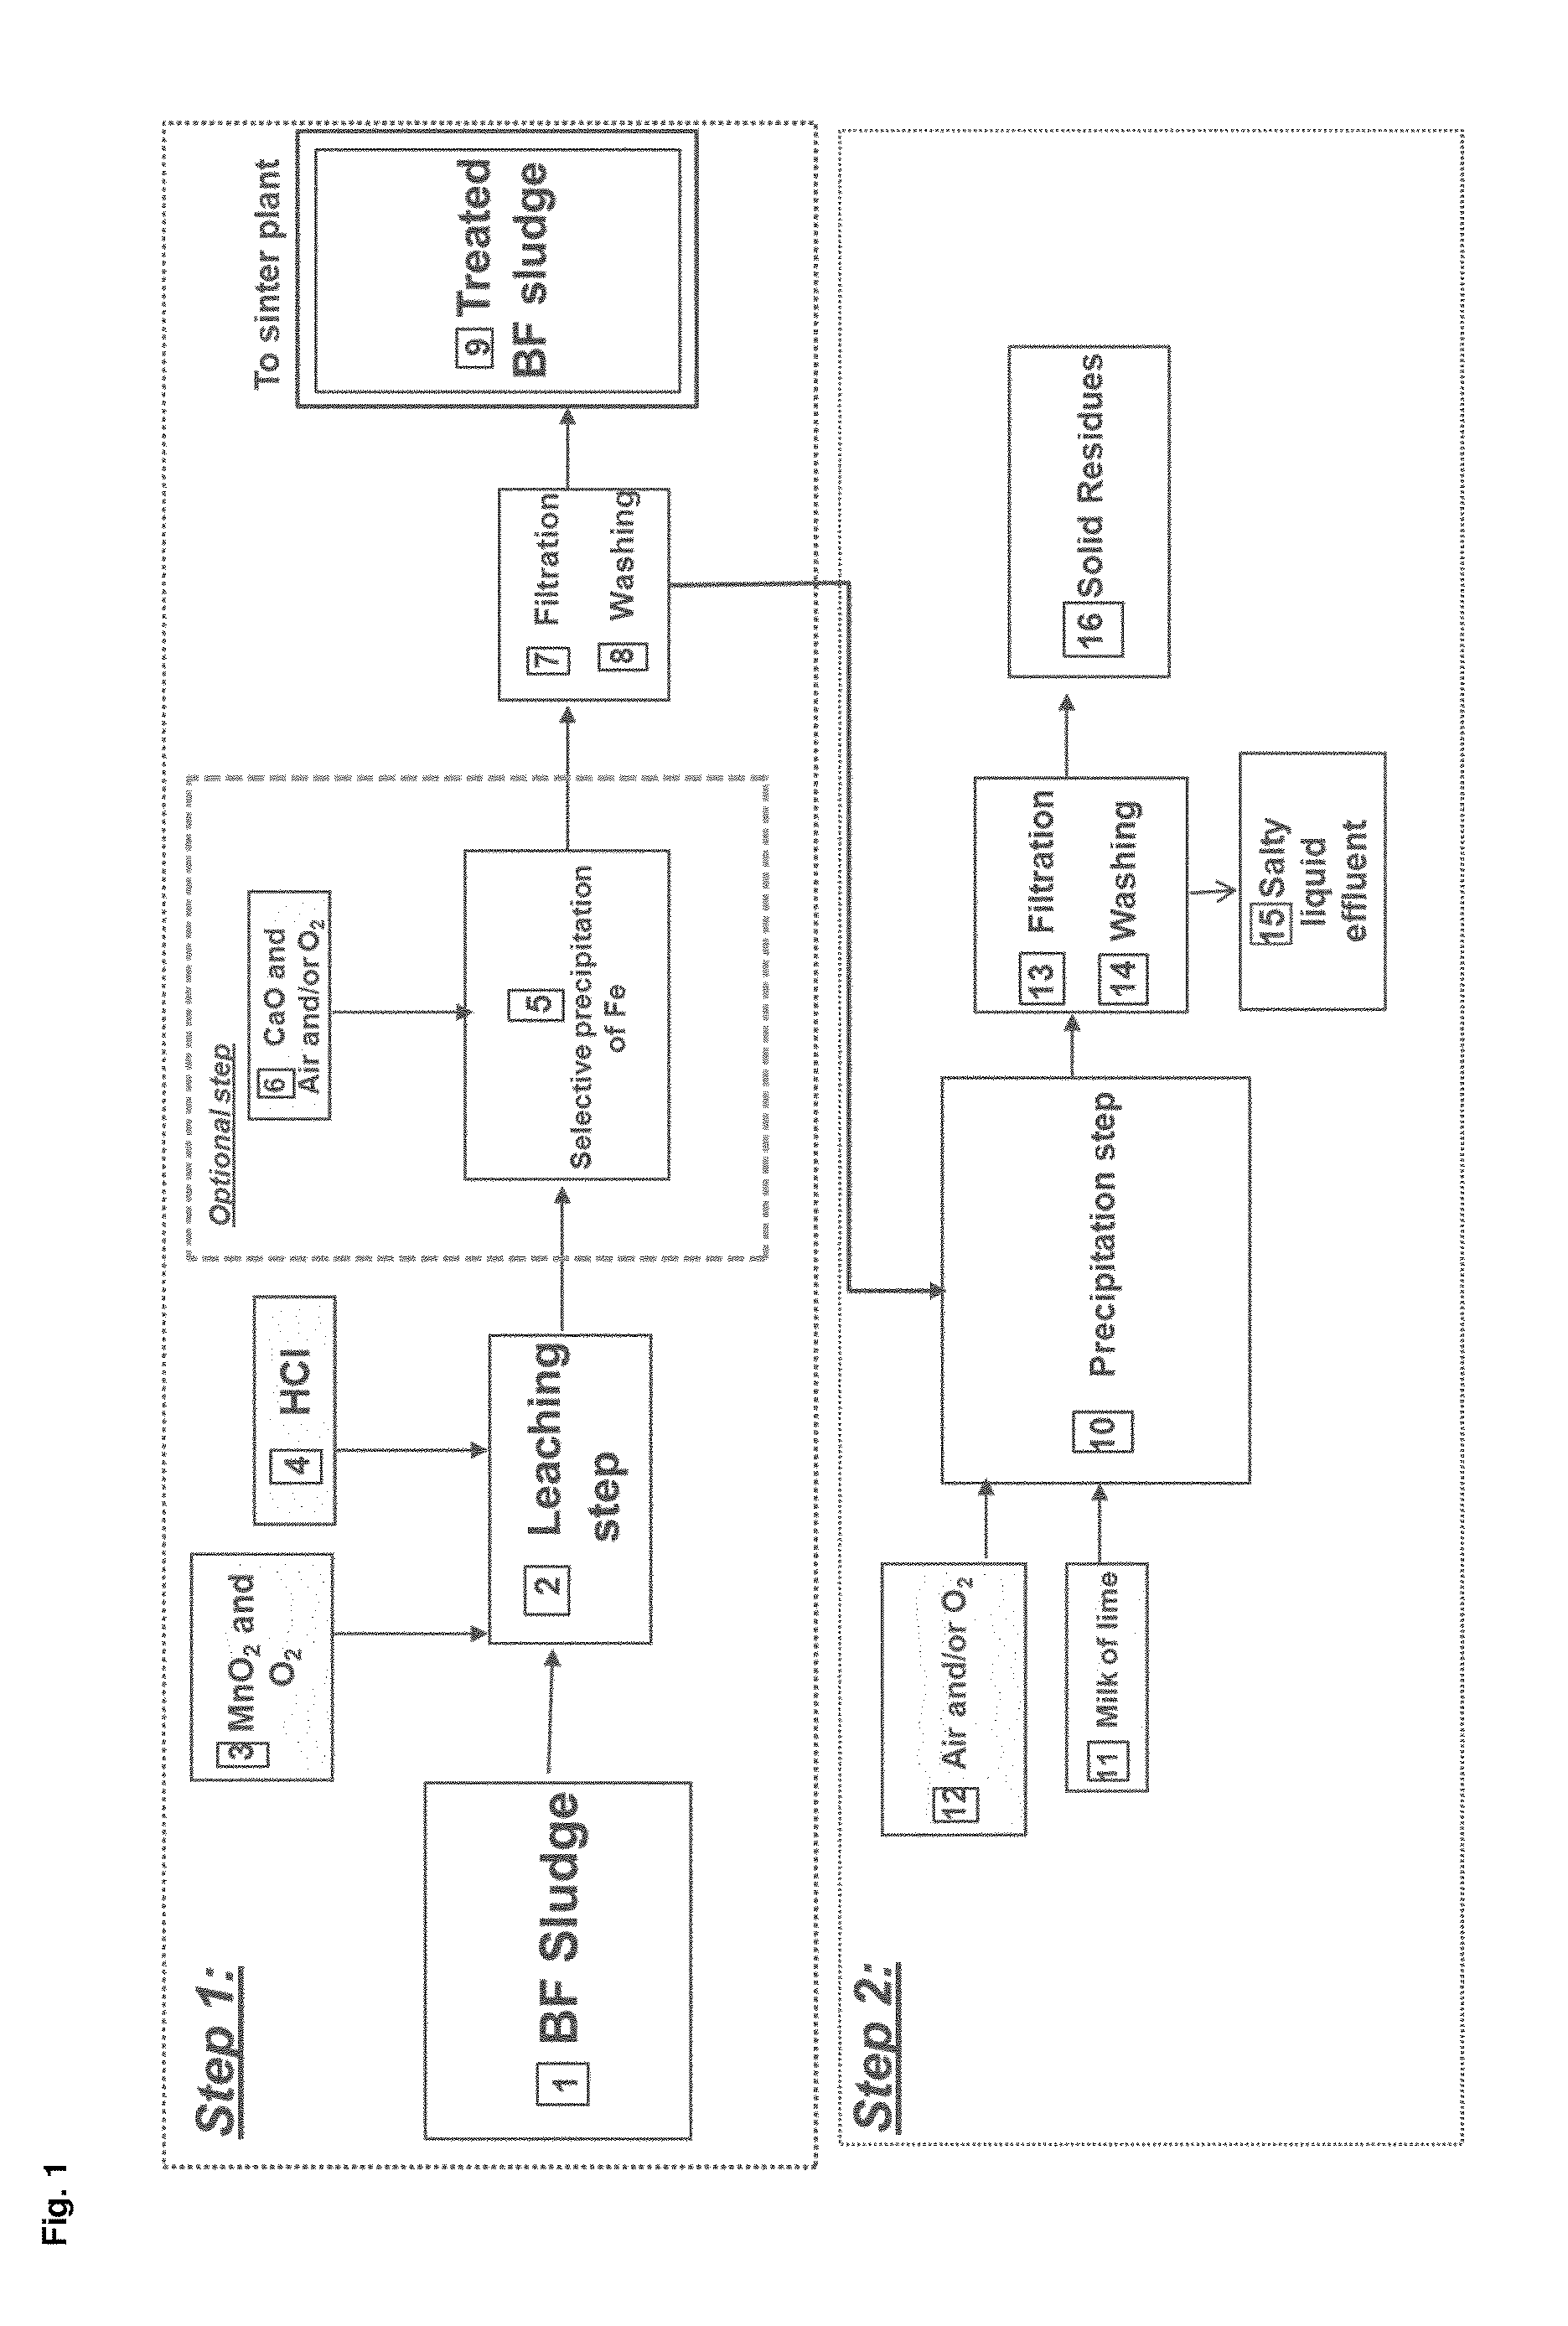 Process for reducing the amounts of zinc (ZN) and lead (PB) in materials containing iron (FE)